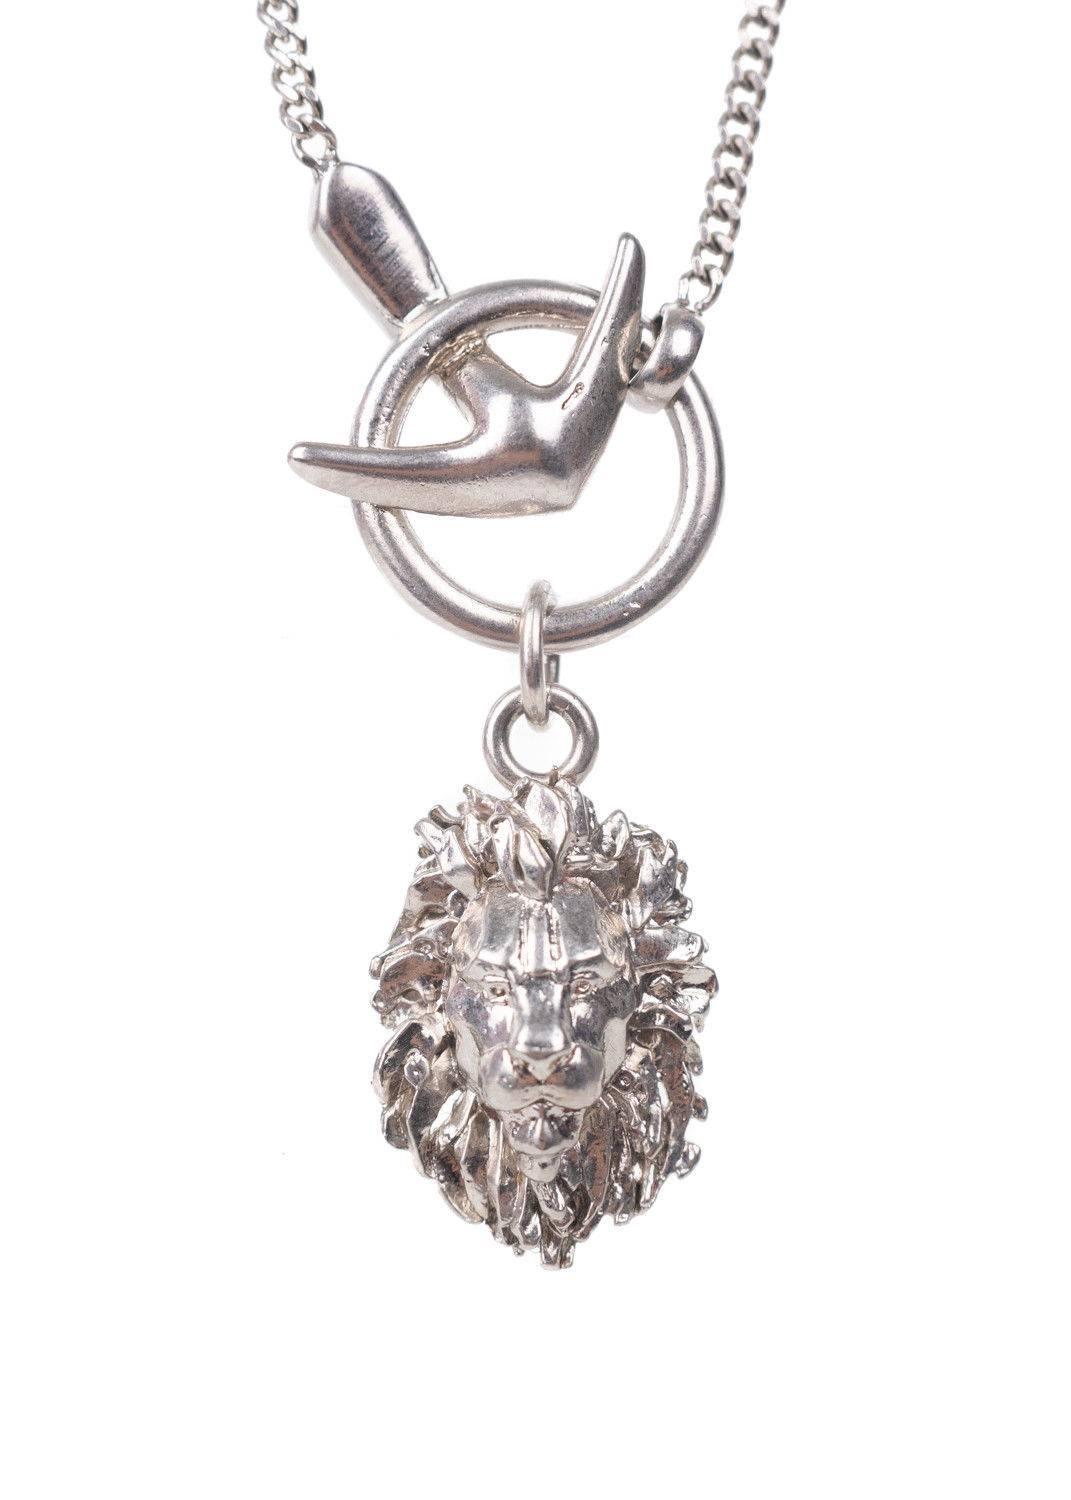 Get your Roberto Cavalli Necklace for the ultimate win. This necklace features a thin silver chain, small lion head pendant, and tonal silver circular appliques. You can pair this necklace with a deep v neck dress and go. 

11 inch Length
1 inch